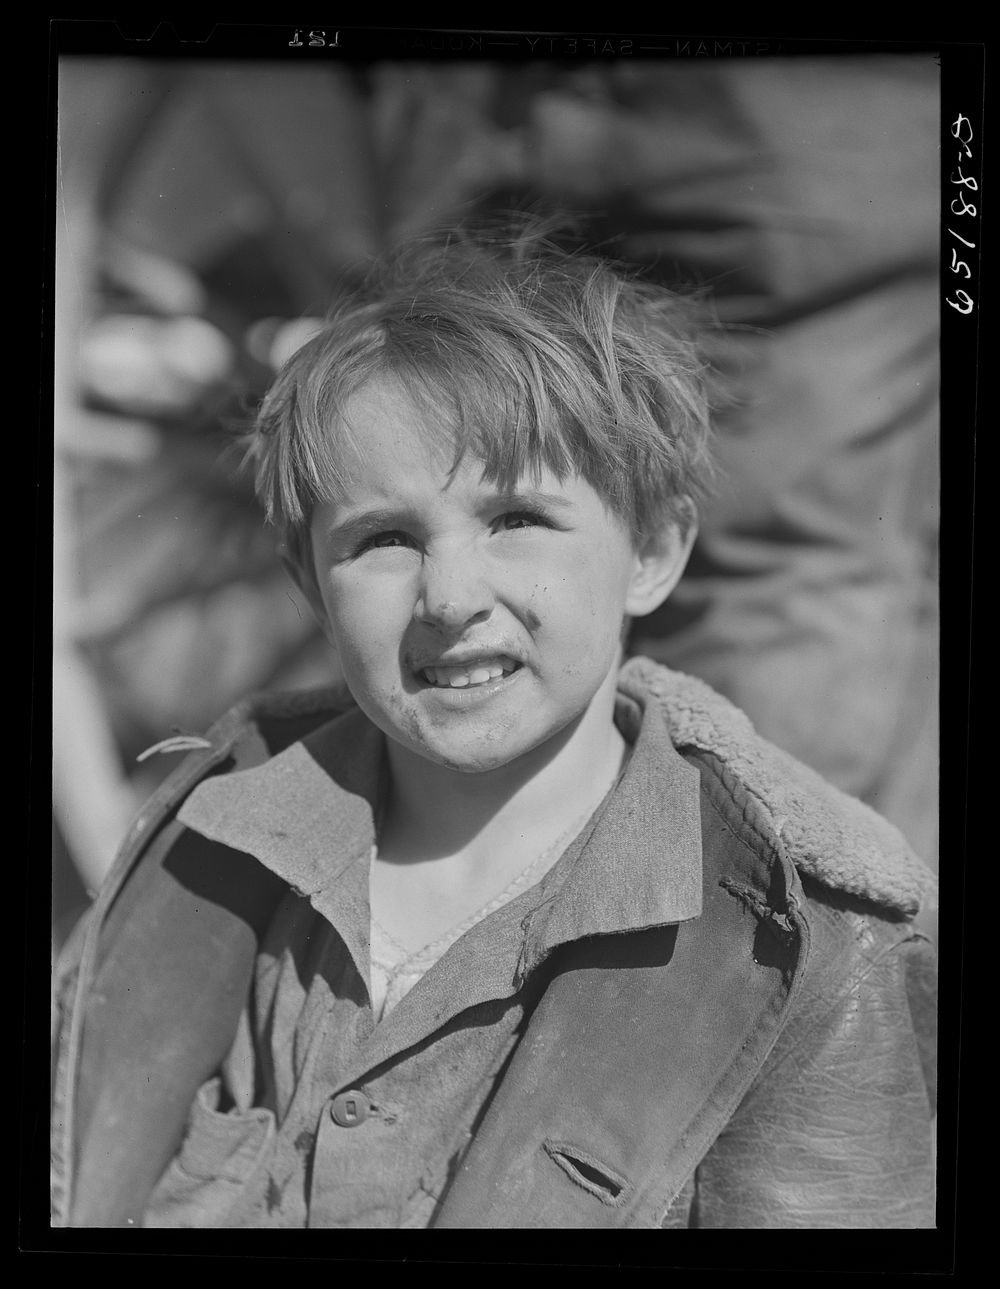 Flathead valley special area project, Montana. Sarah Ballinger, daughter of FSA (Farm Security Administration) borrower.…